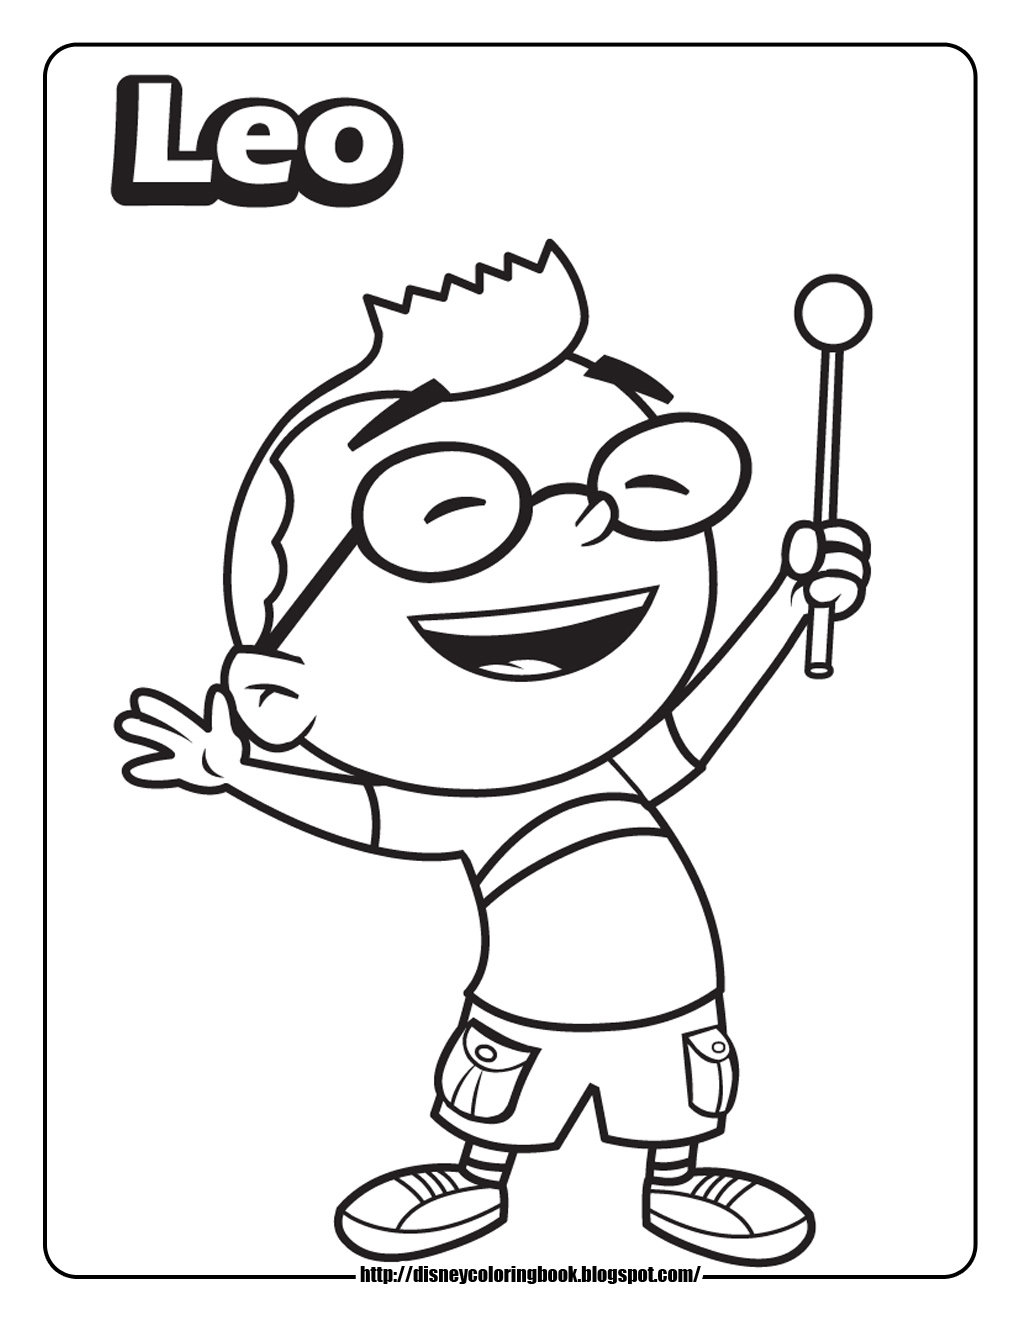 Disney Coloring Pages and Sheets for Kids: Little Einsteins 1: Free 